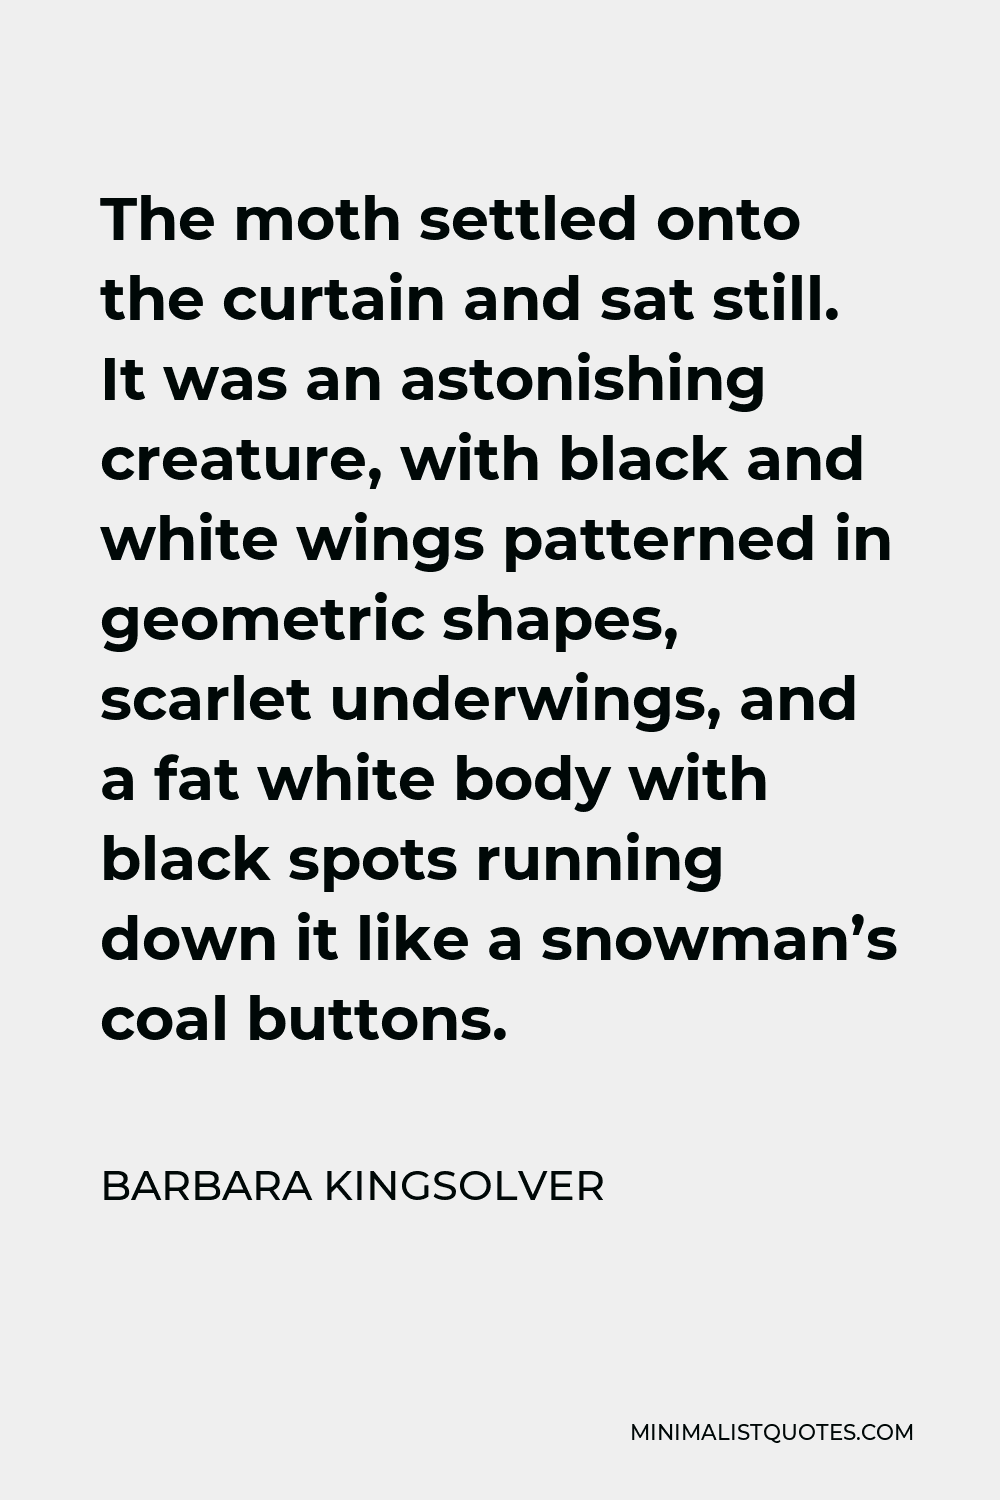 Barbara Kingsolver Quote - The moth settled onto the curtain and sat still. It was an astonishing creature, with black and white wings patterned in geometric shapes, scarlet underwings, and a fat white body with black spots running down it like a snowman’s coal buttons.